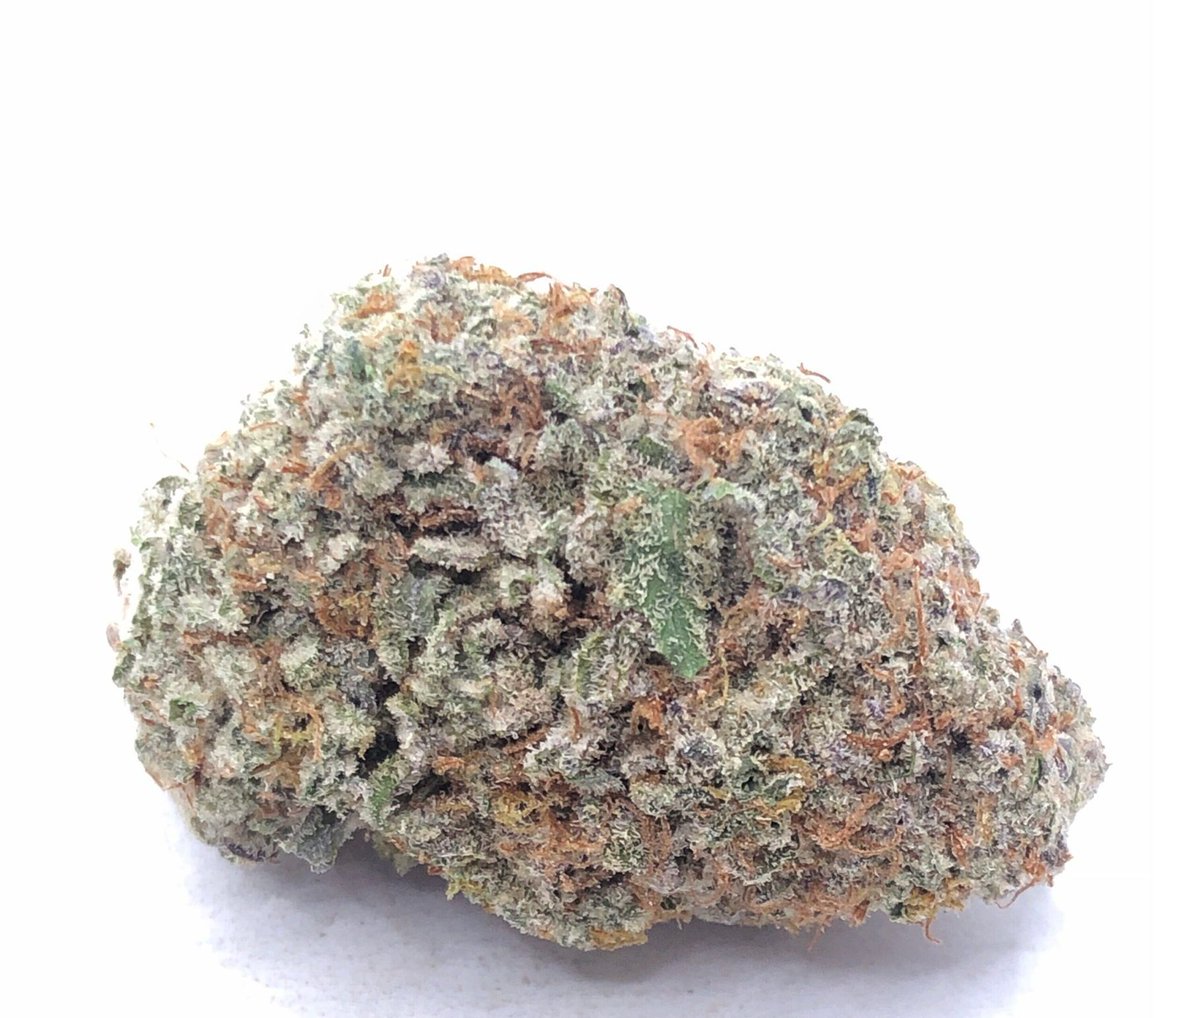 Apple MAC, also known as “Apple Miracle Alien Cookies” or “Apple M.A.C.,” is a slightly indica dominant hybrid strain (60% indica/40% sativa) created through crossing the iconic MAC 1 X Trophy Wife strains. #CouponCODE: 🌱 CBDHERB 🌱 soloherbs.com #cannabiscanada